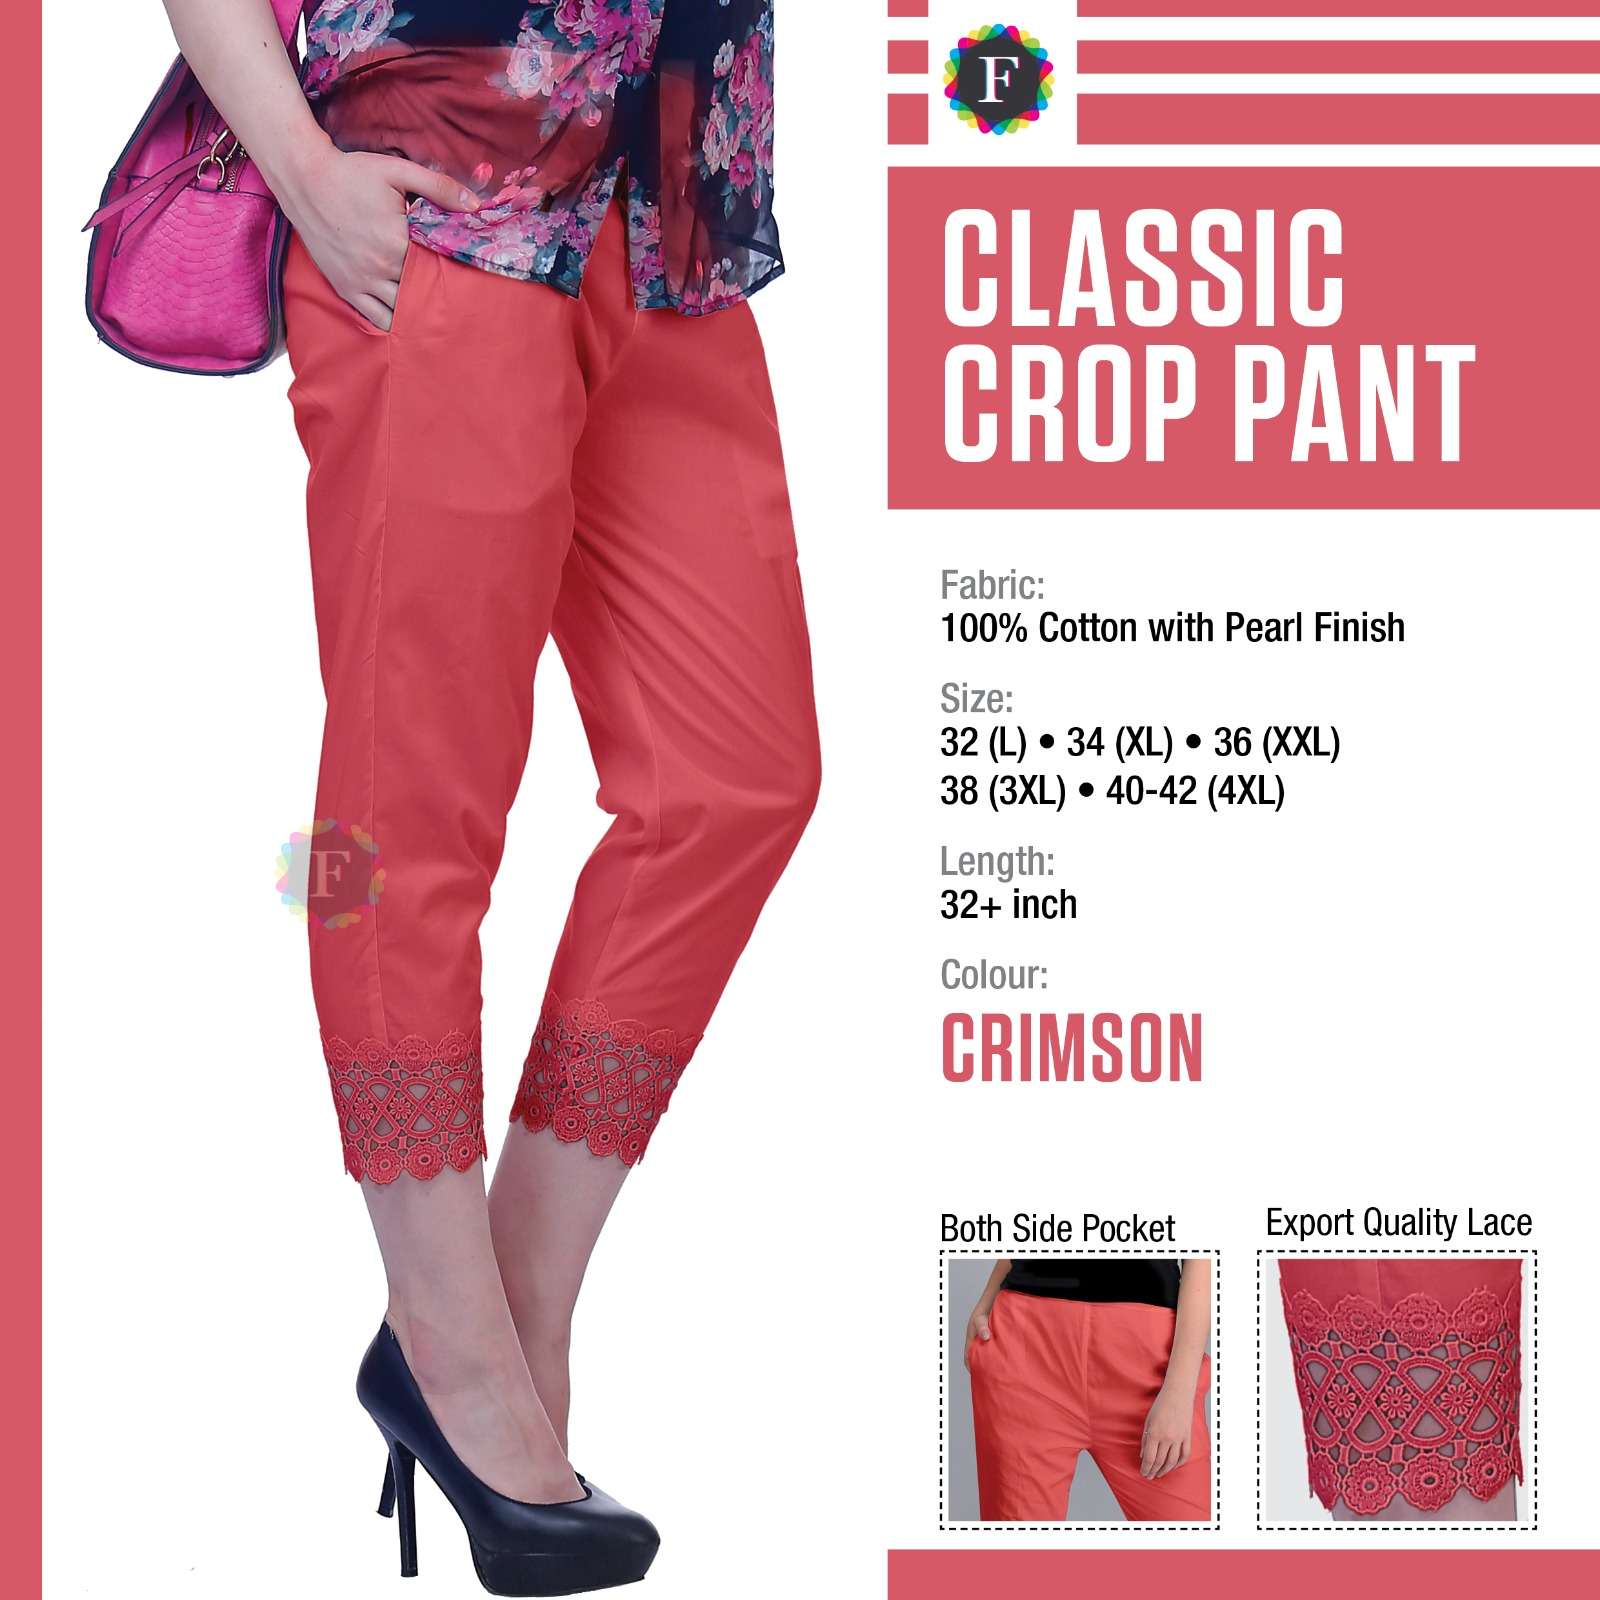 Classic Crop Pant Stylish Fancy Summer Wear Bottom Pant Collection